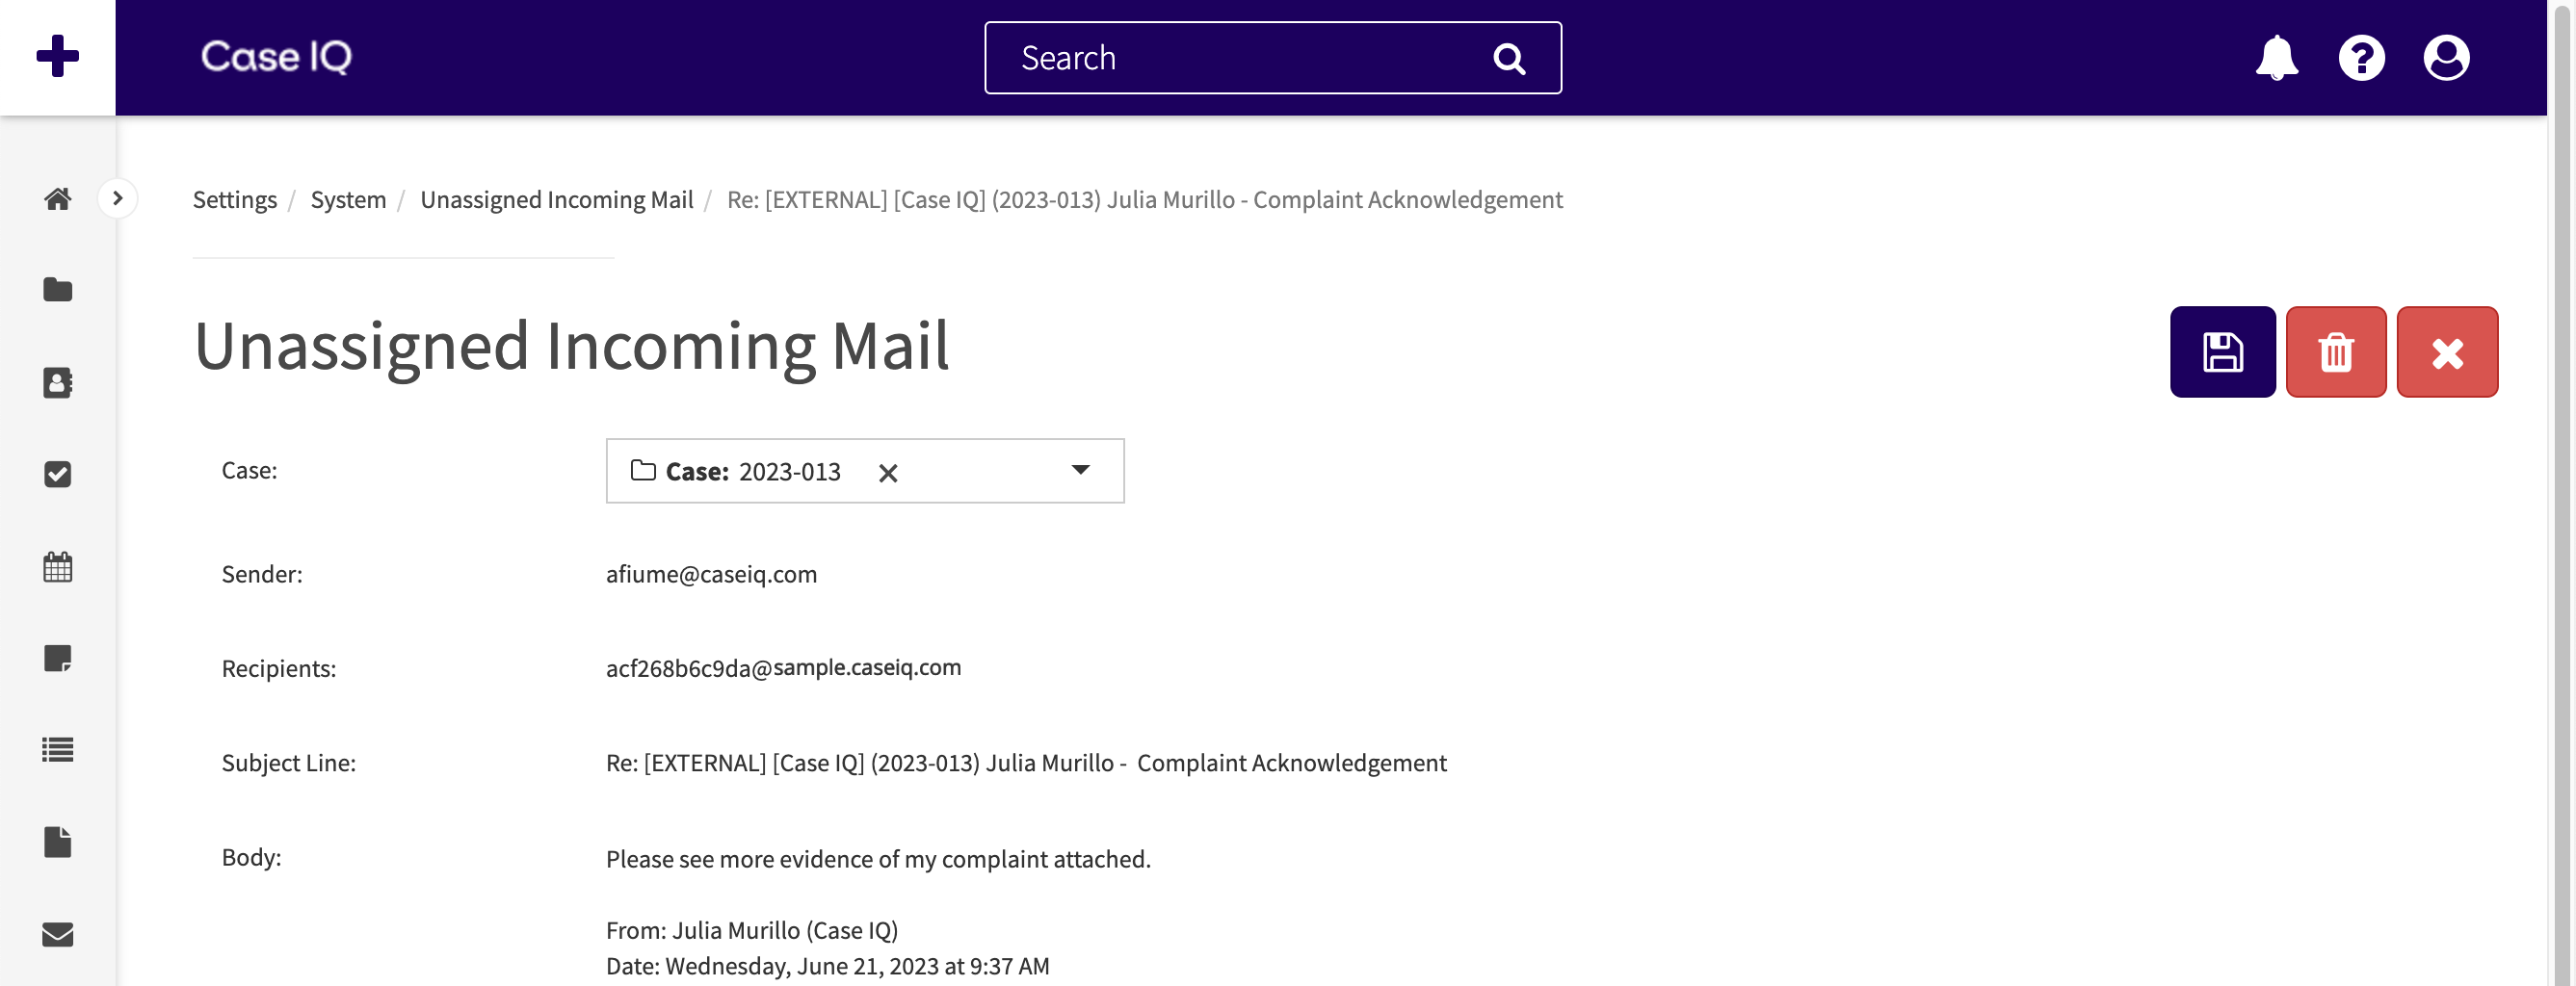 An incoming email page. The "Case #" field has been selected as "2023-0013".